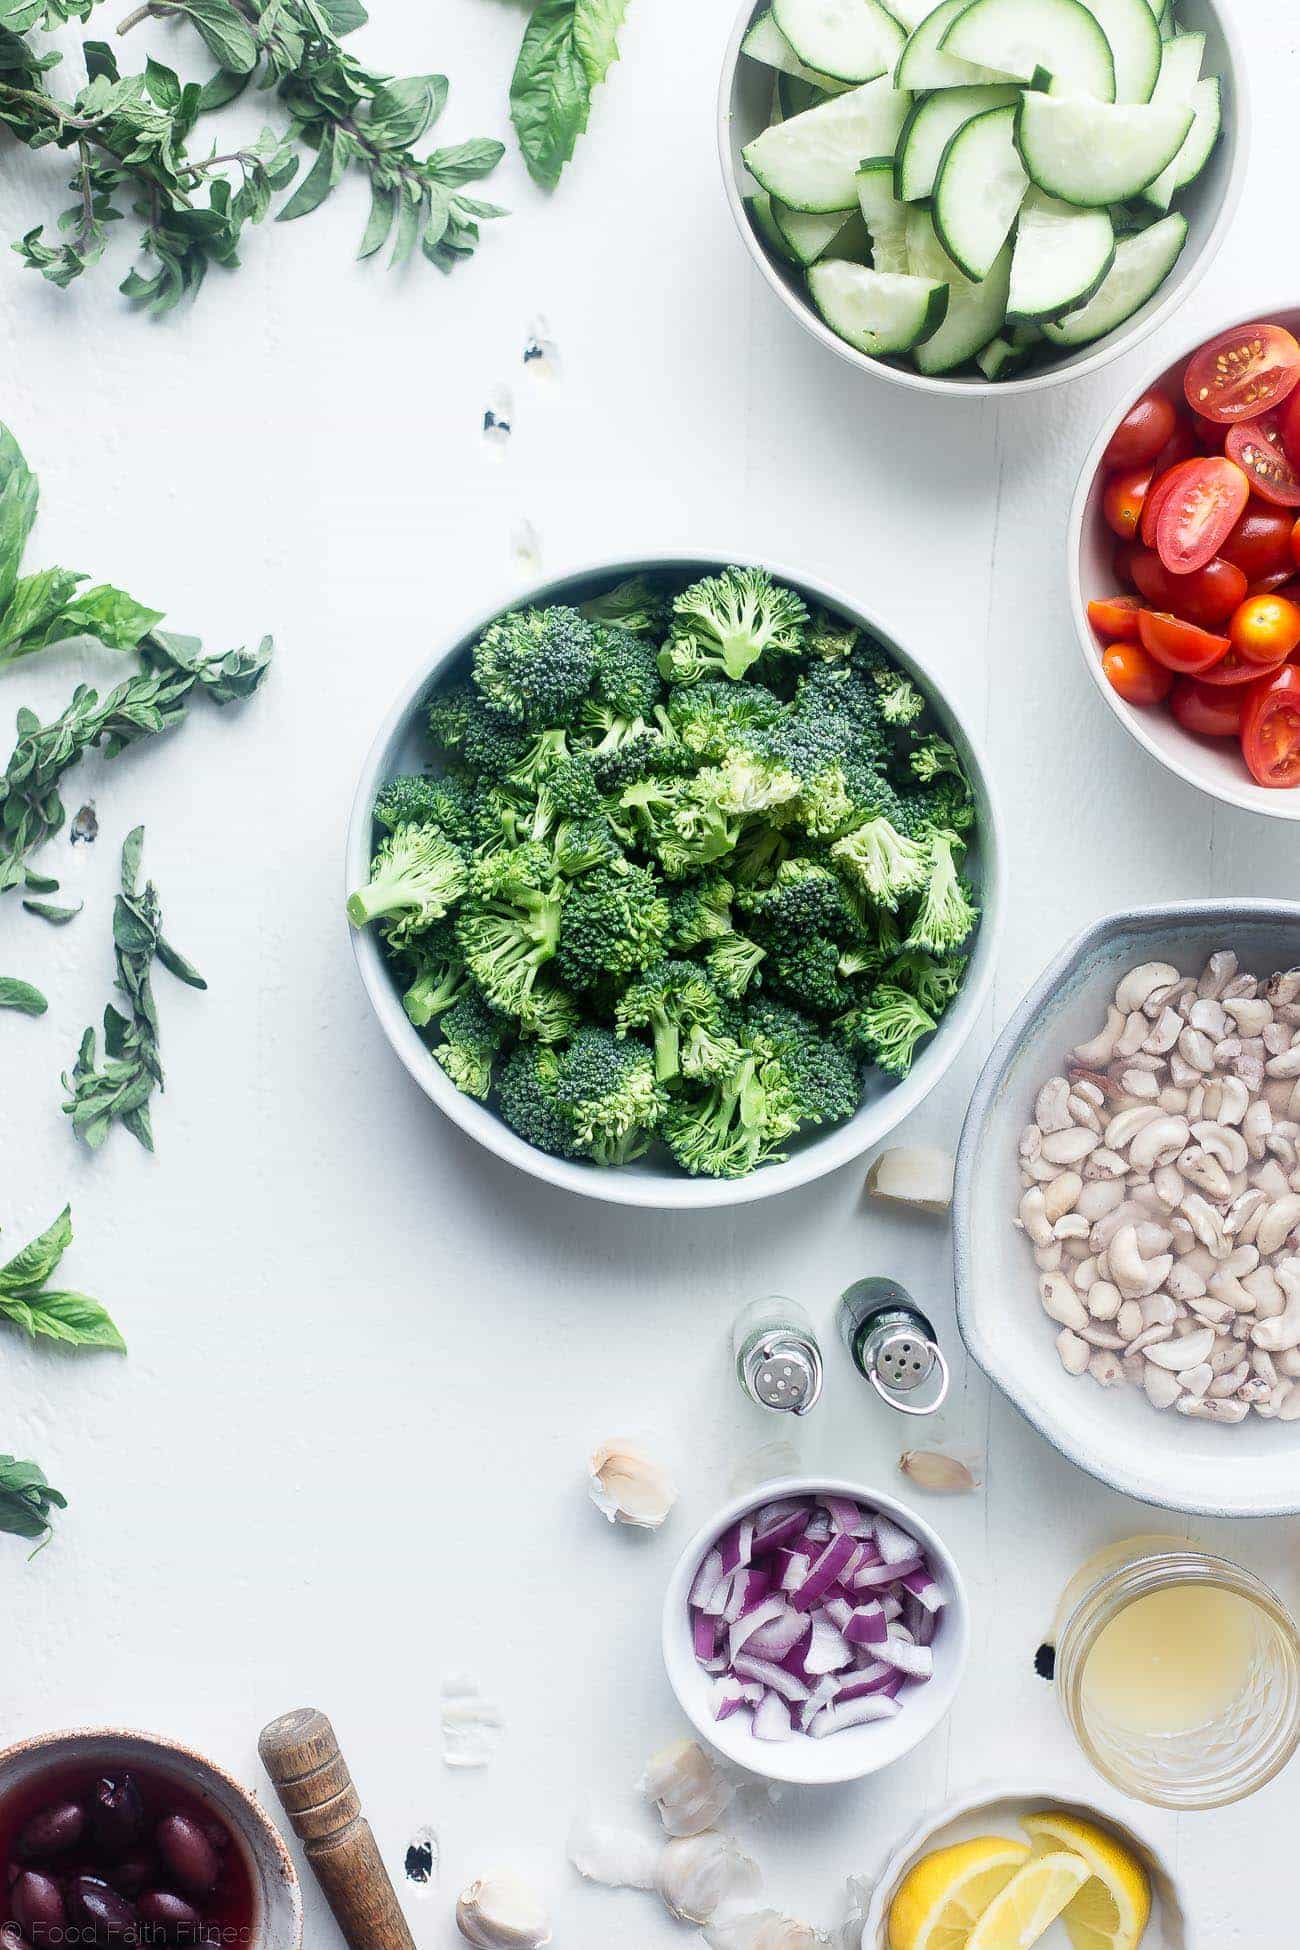 Greek Vegan Broccoli Salad - This low carb, raw broccoli salad is so creamy you'll never know it's vegan, paleo and whole30 compliant! It's an easy side dish that's perfect for spring potlucks! | Foodfaithfitness.com | @FoodFaithFit